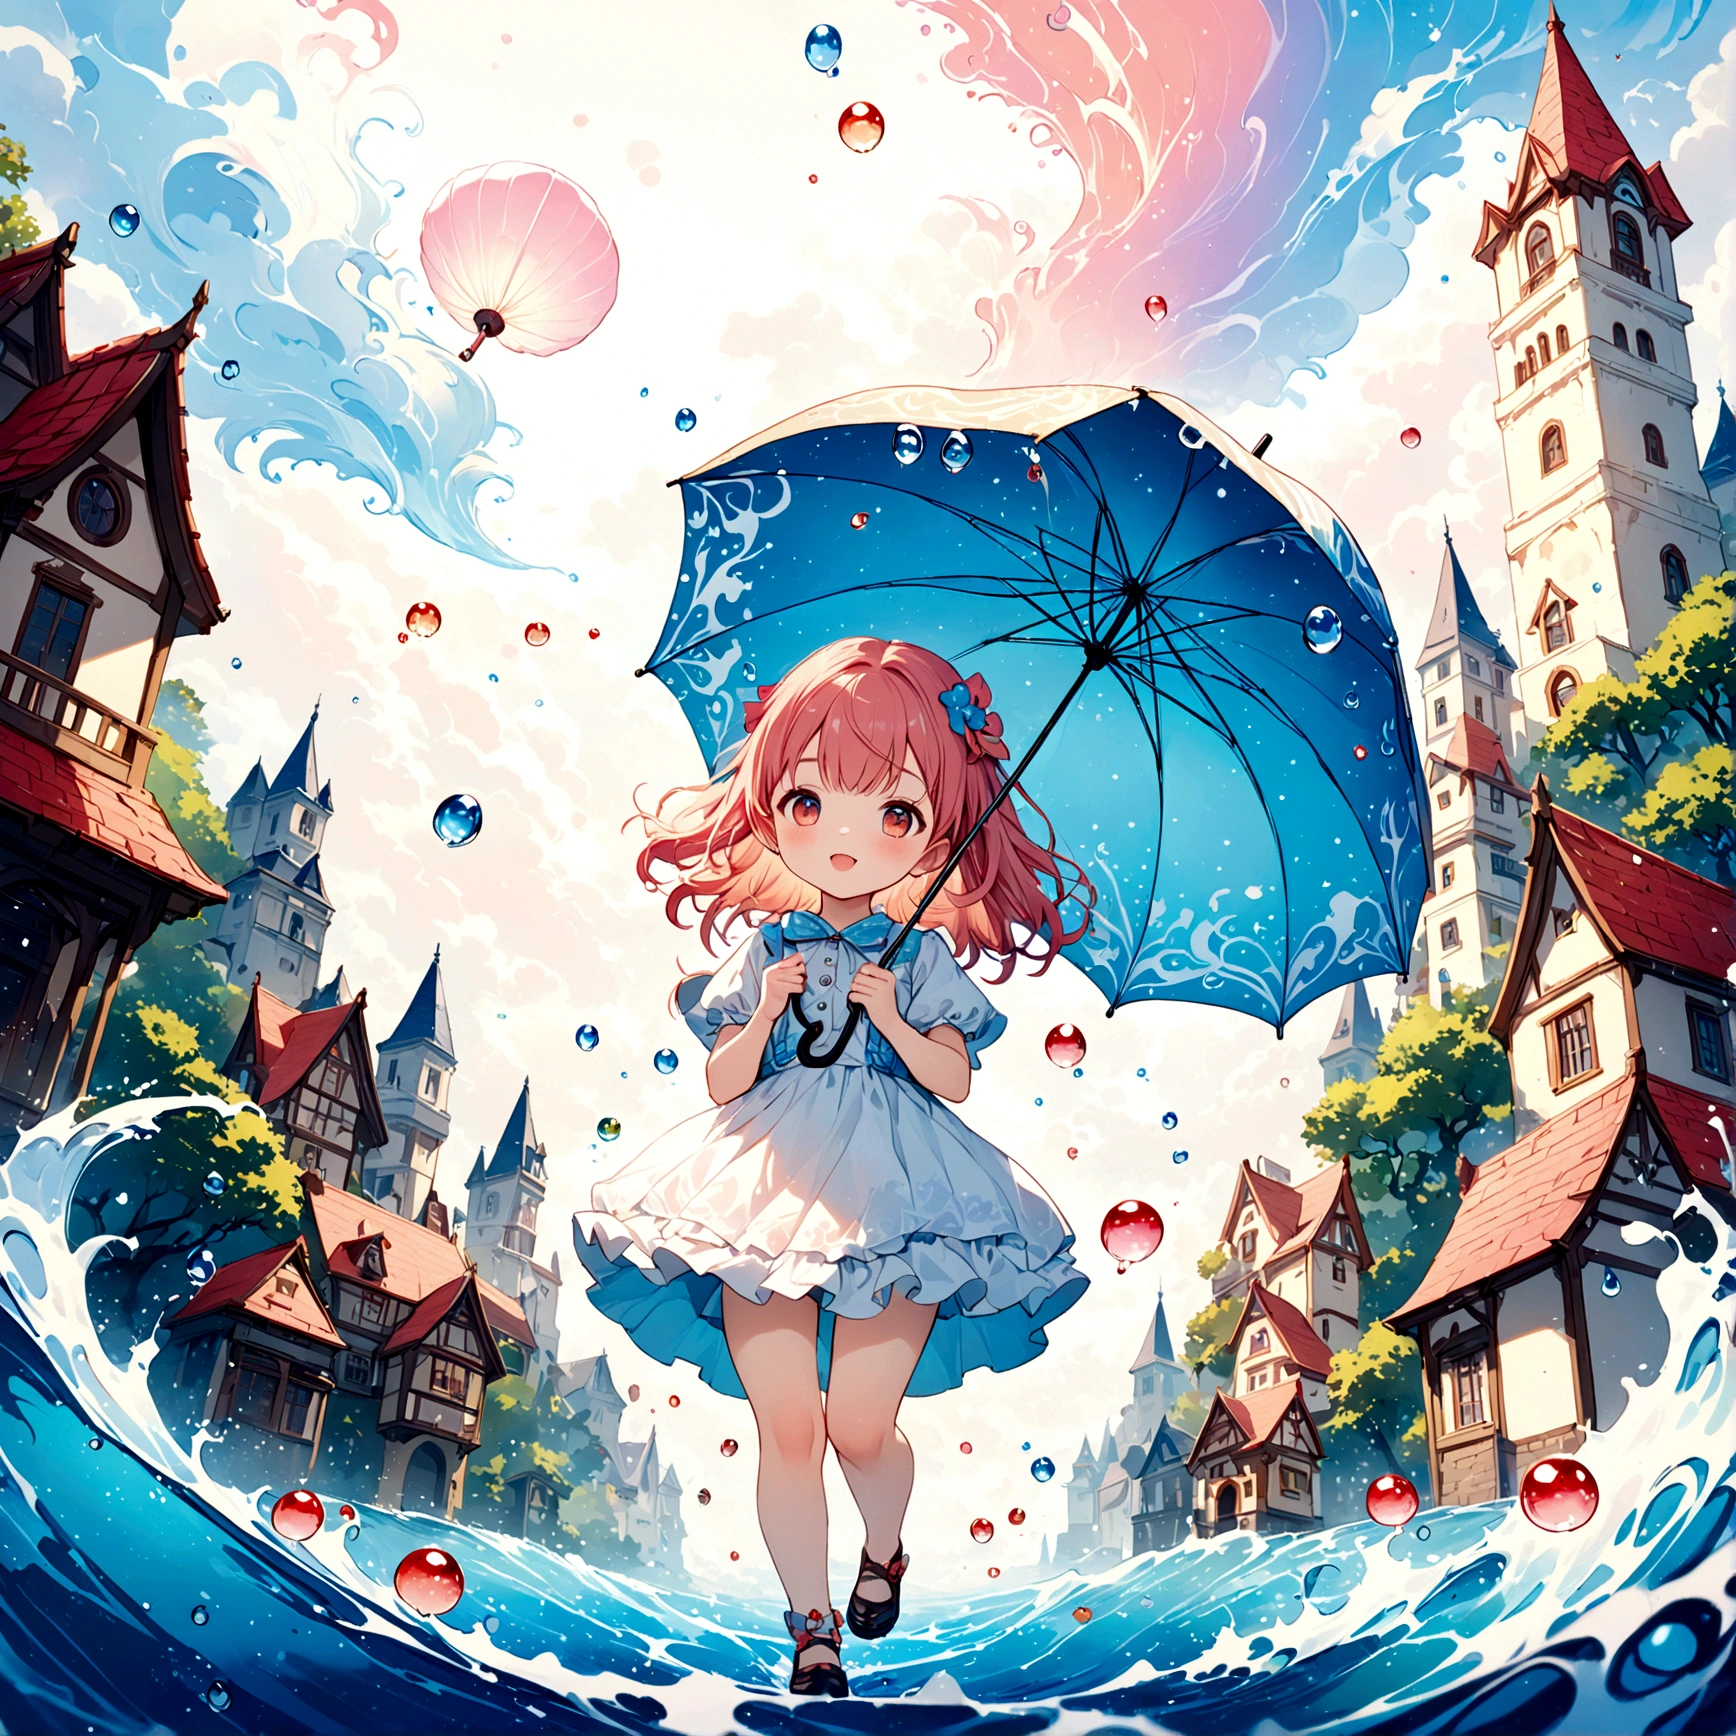 Cute illustration: landscape,Street corner on a rainy day,A landscape like something out of a picture book,Emotional,Girl is walking,BREAK,(Girl with an umbrella),umbrella,Anatomically correct,BREAK,Create an artistic background,Add a drop pattern to the background,The street is colorful, Fairytale-like,This is a cute illustration like a dream.,Blur the lines of the water droplets for an artistic look.,Intricate details,Wide range of colors,artwork,rendering,(masterpiece:1.3),(Highest quality:1.4),(Very detailedな:1.5),High resolution,Very detailed,unity 8k wallpaper,Structurally correct,cute,Fantasy